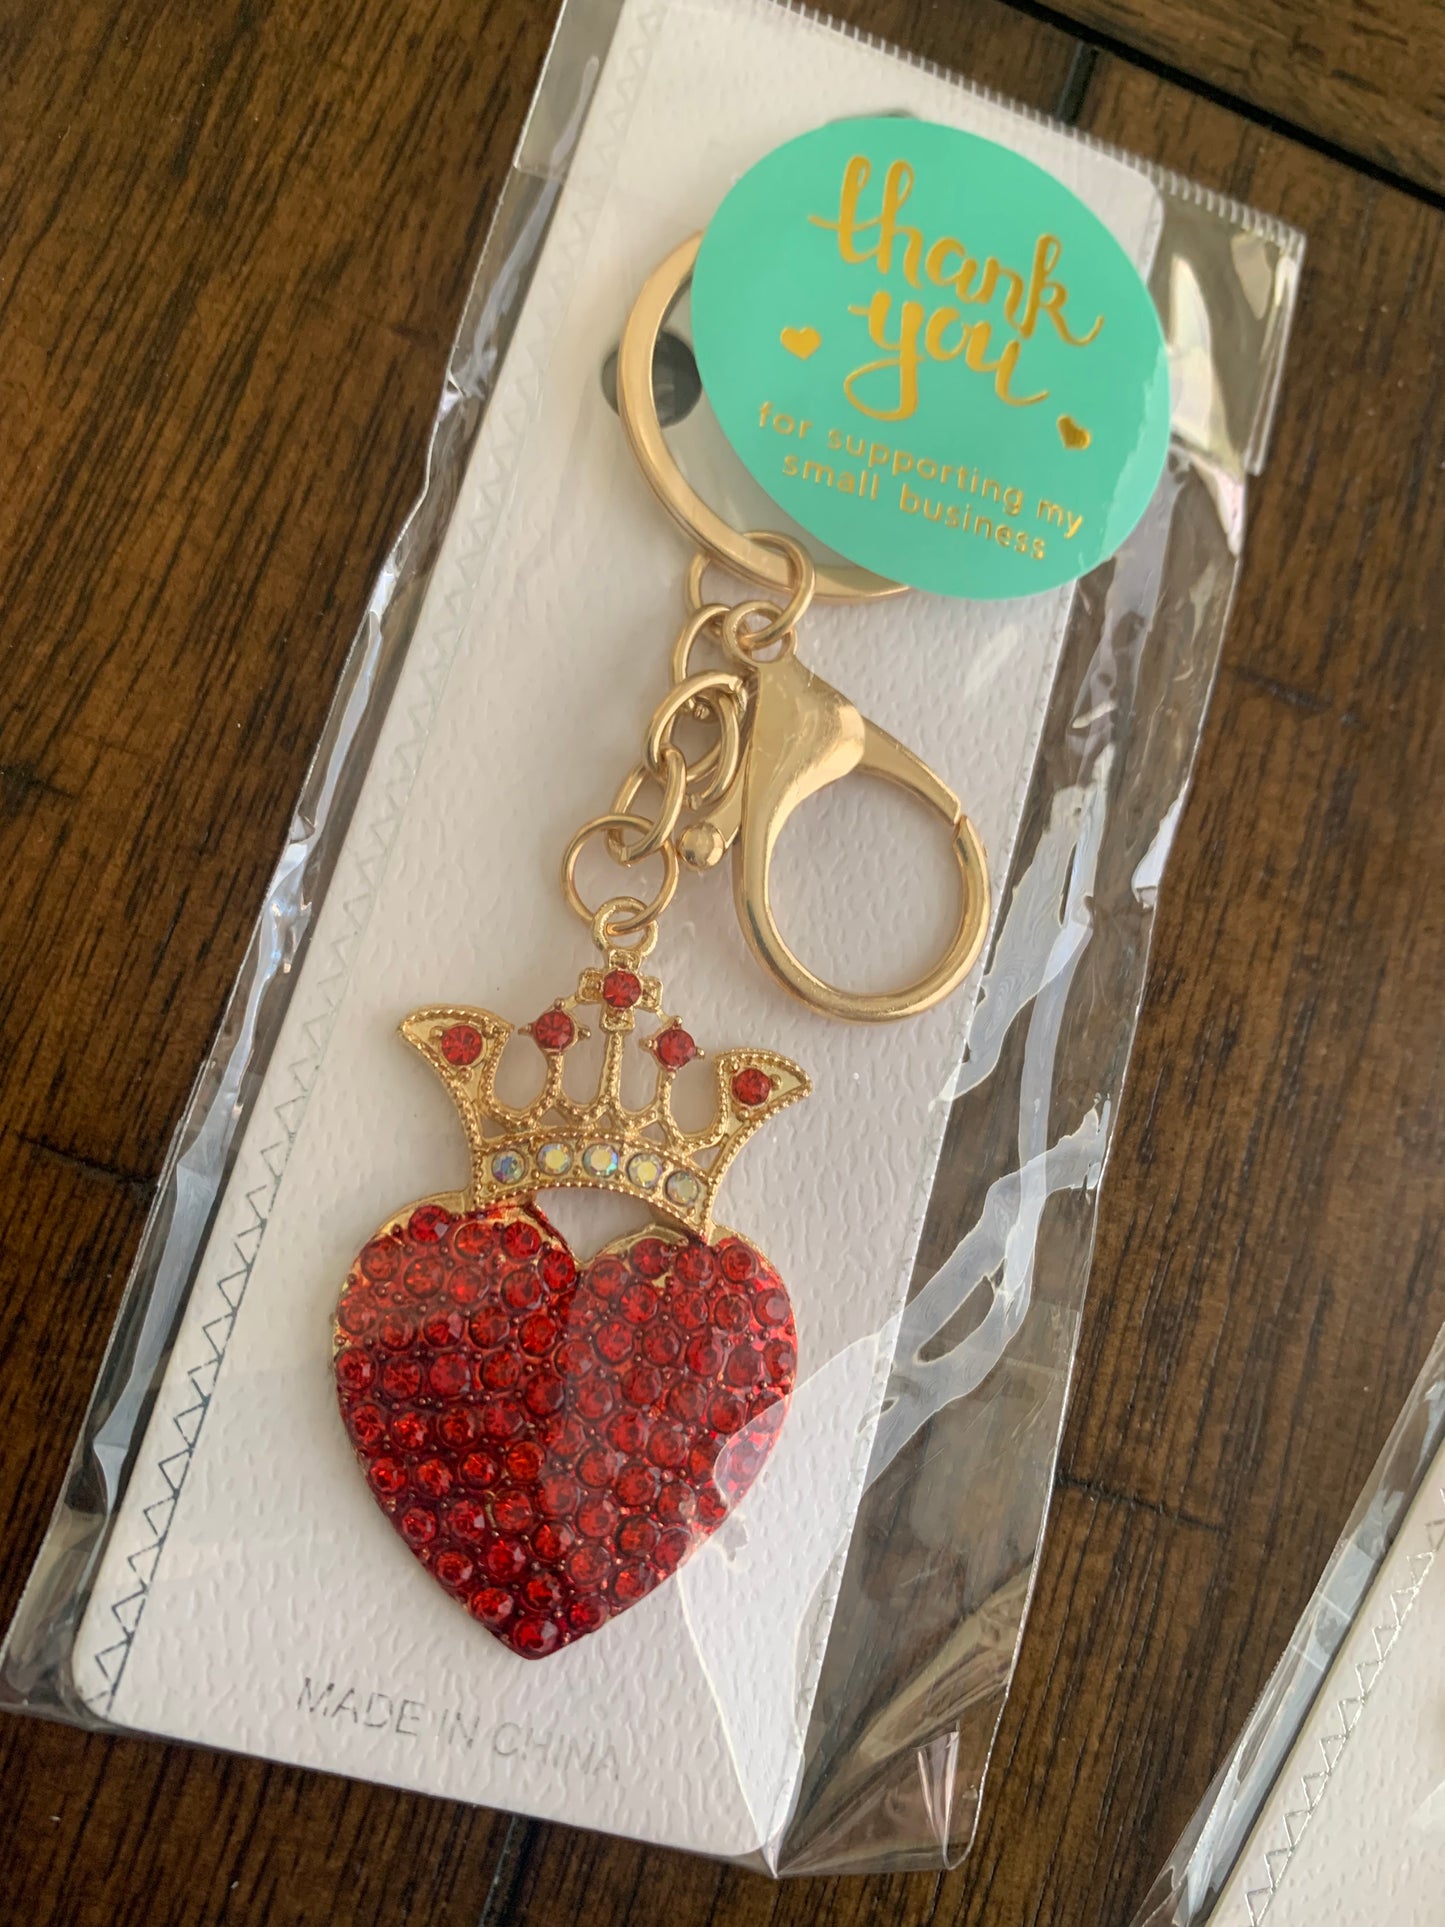 Bling Assorted crown and hearts keychains/purse charms thank you gift pack of 6